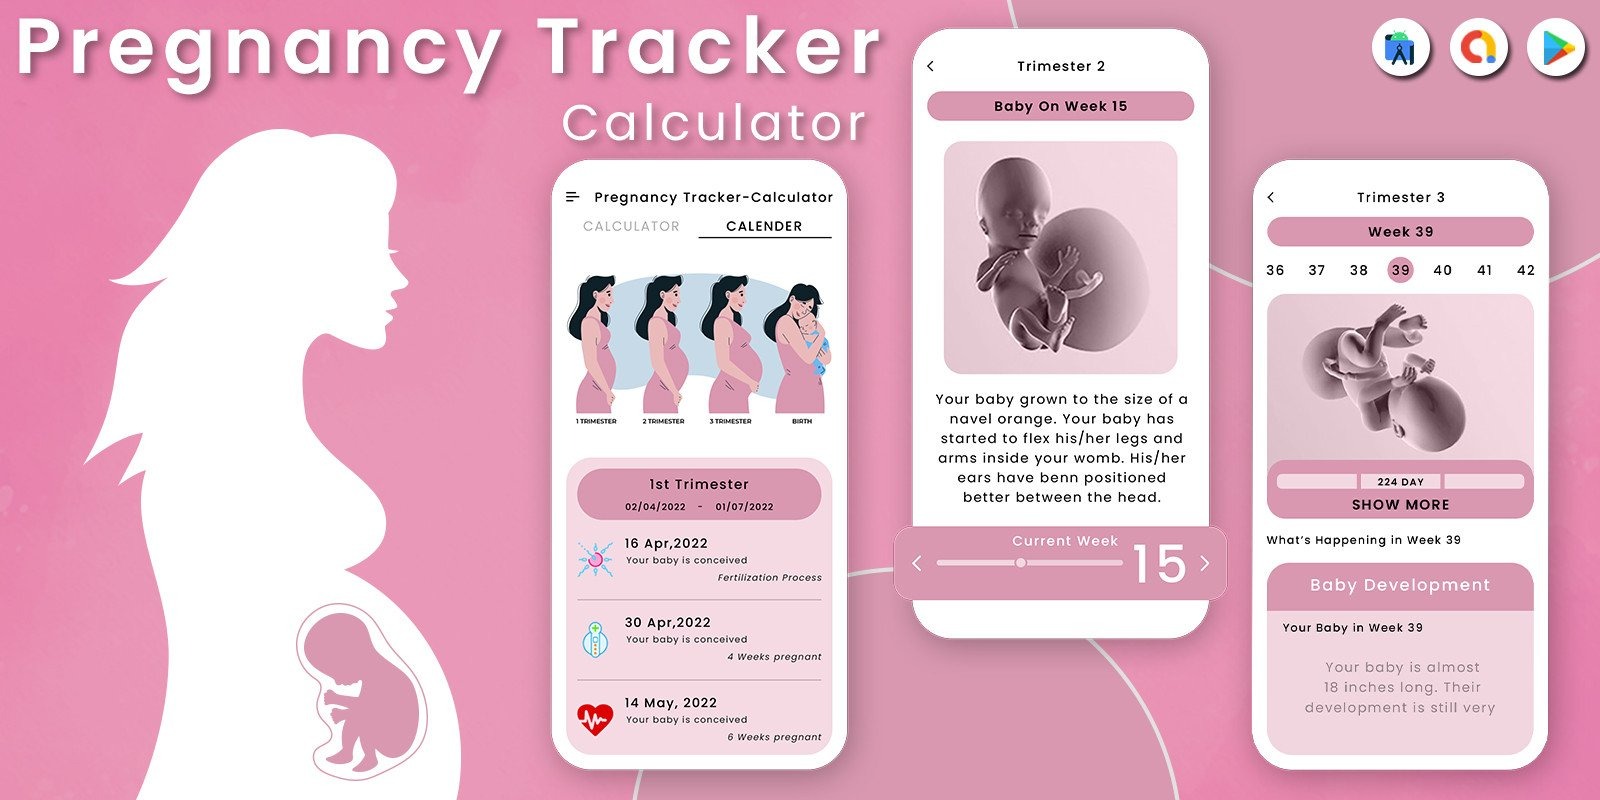 Pregnancy Due Date Calculator - Android App Source